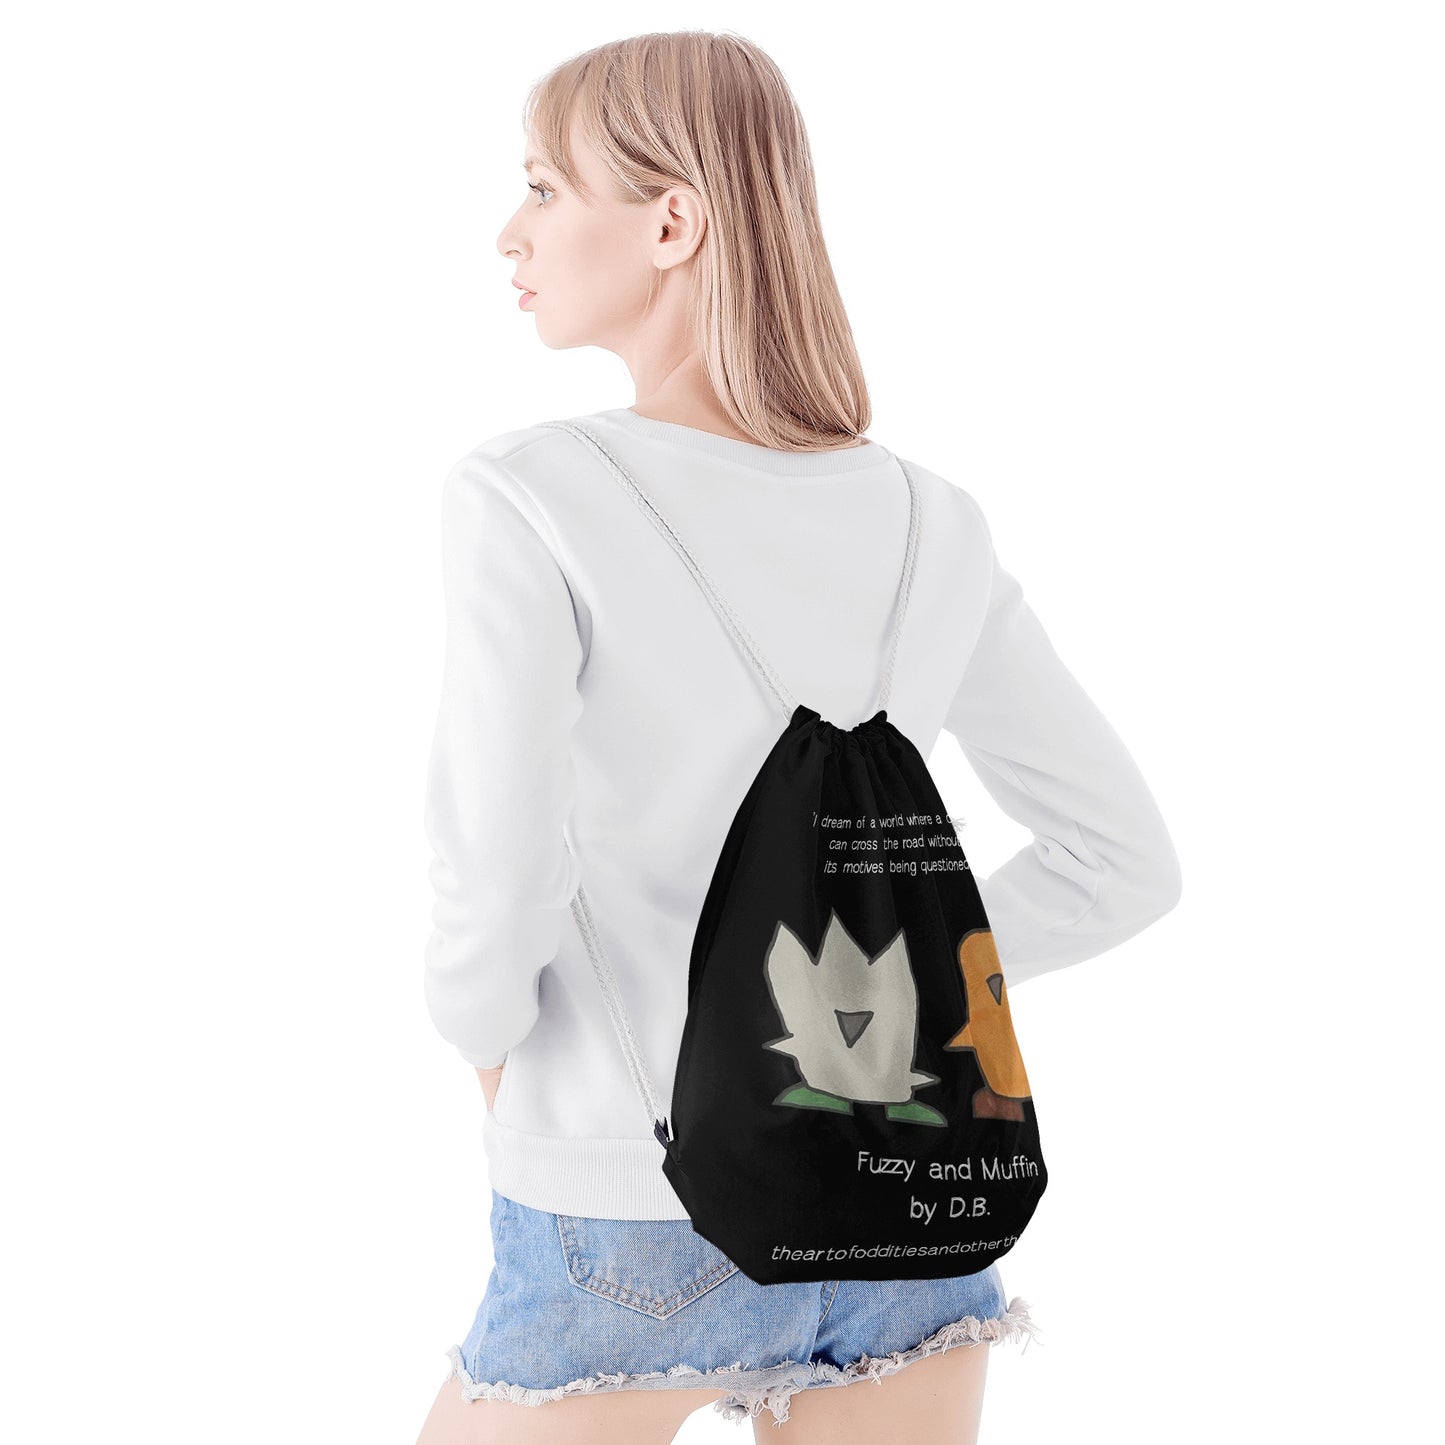 'I dream of a world' Drawstring Bag/Gym Bag/Library Bag with Fuzzy and Muffin Artwork by DB